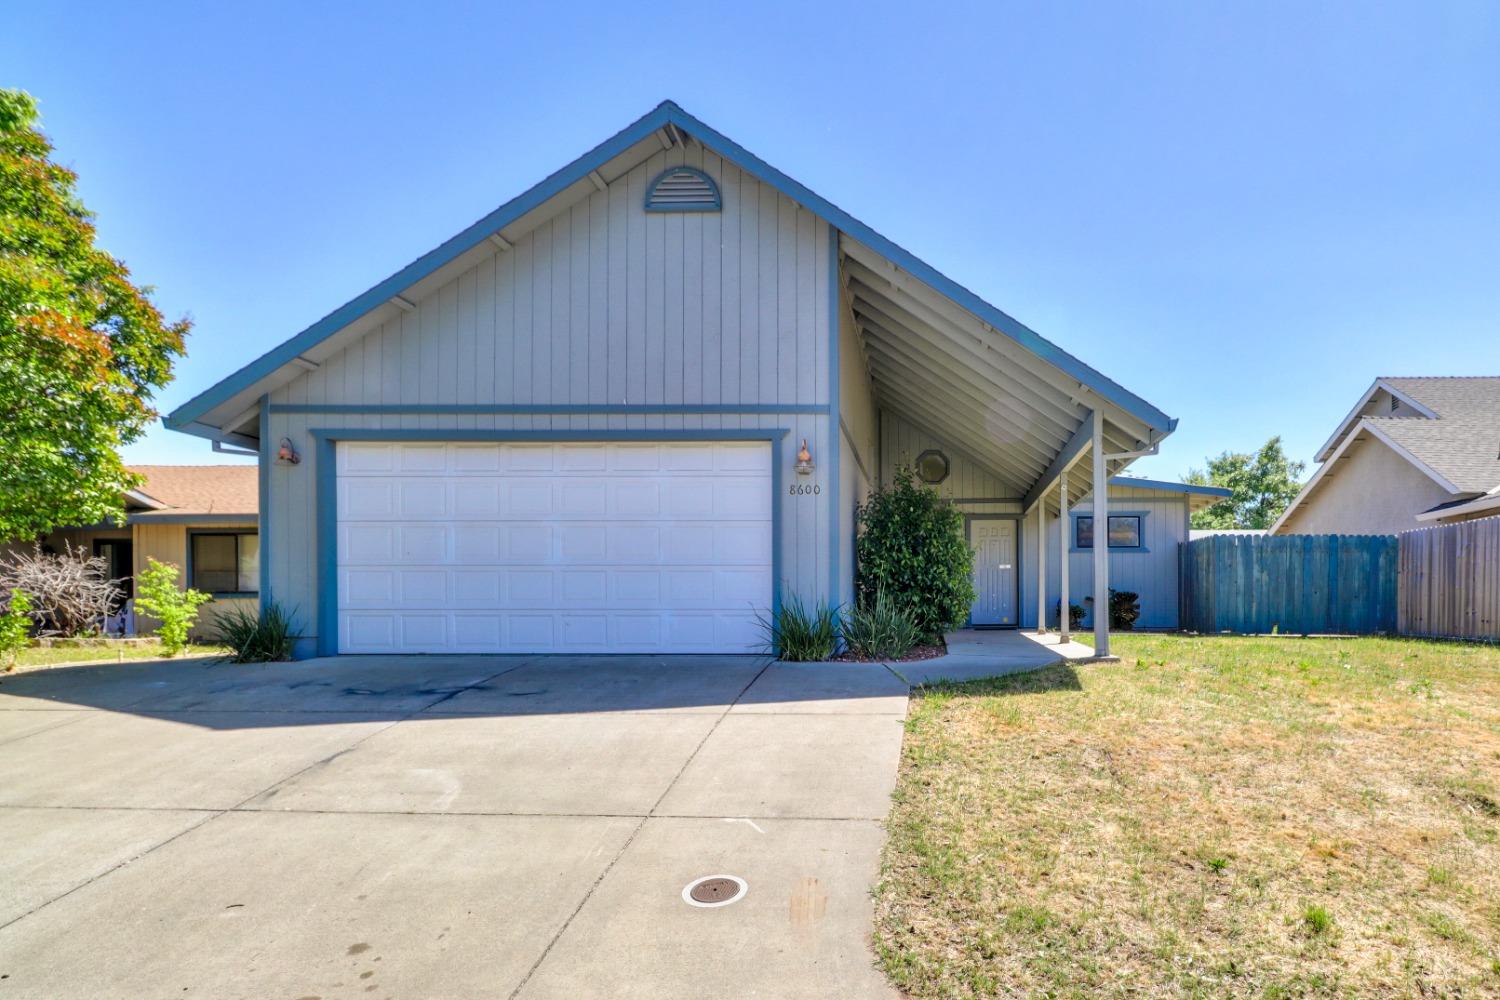 Detail Gallery Image 1 of 35 For 8600 Tiogawoods Dr, Sacramento,  CA 95828 - 3 Beds | 2 Baths